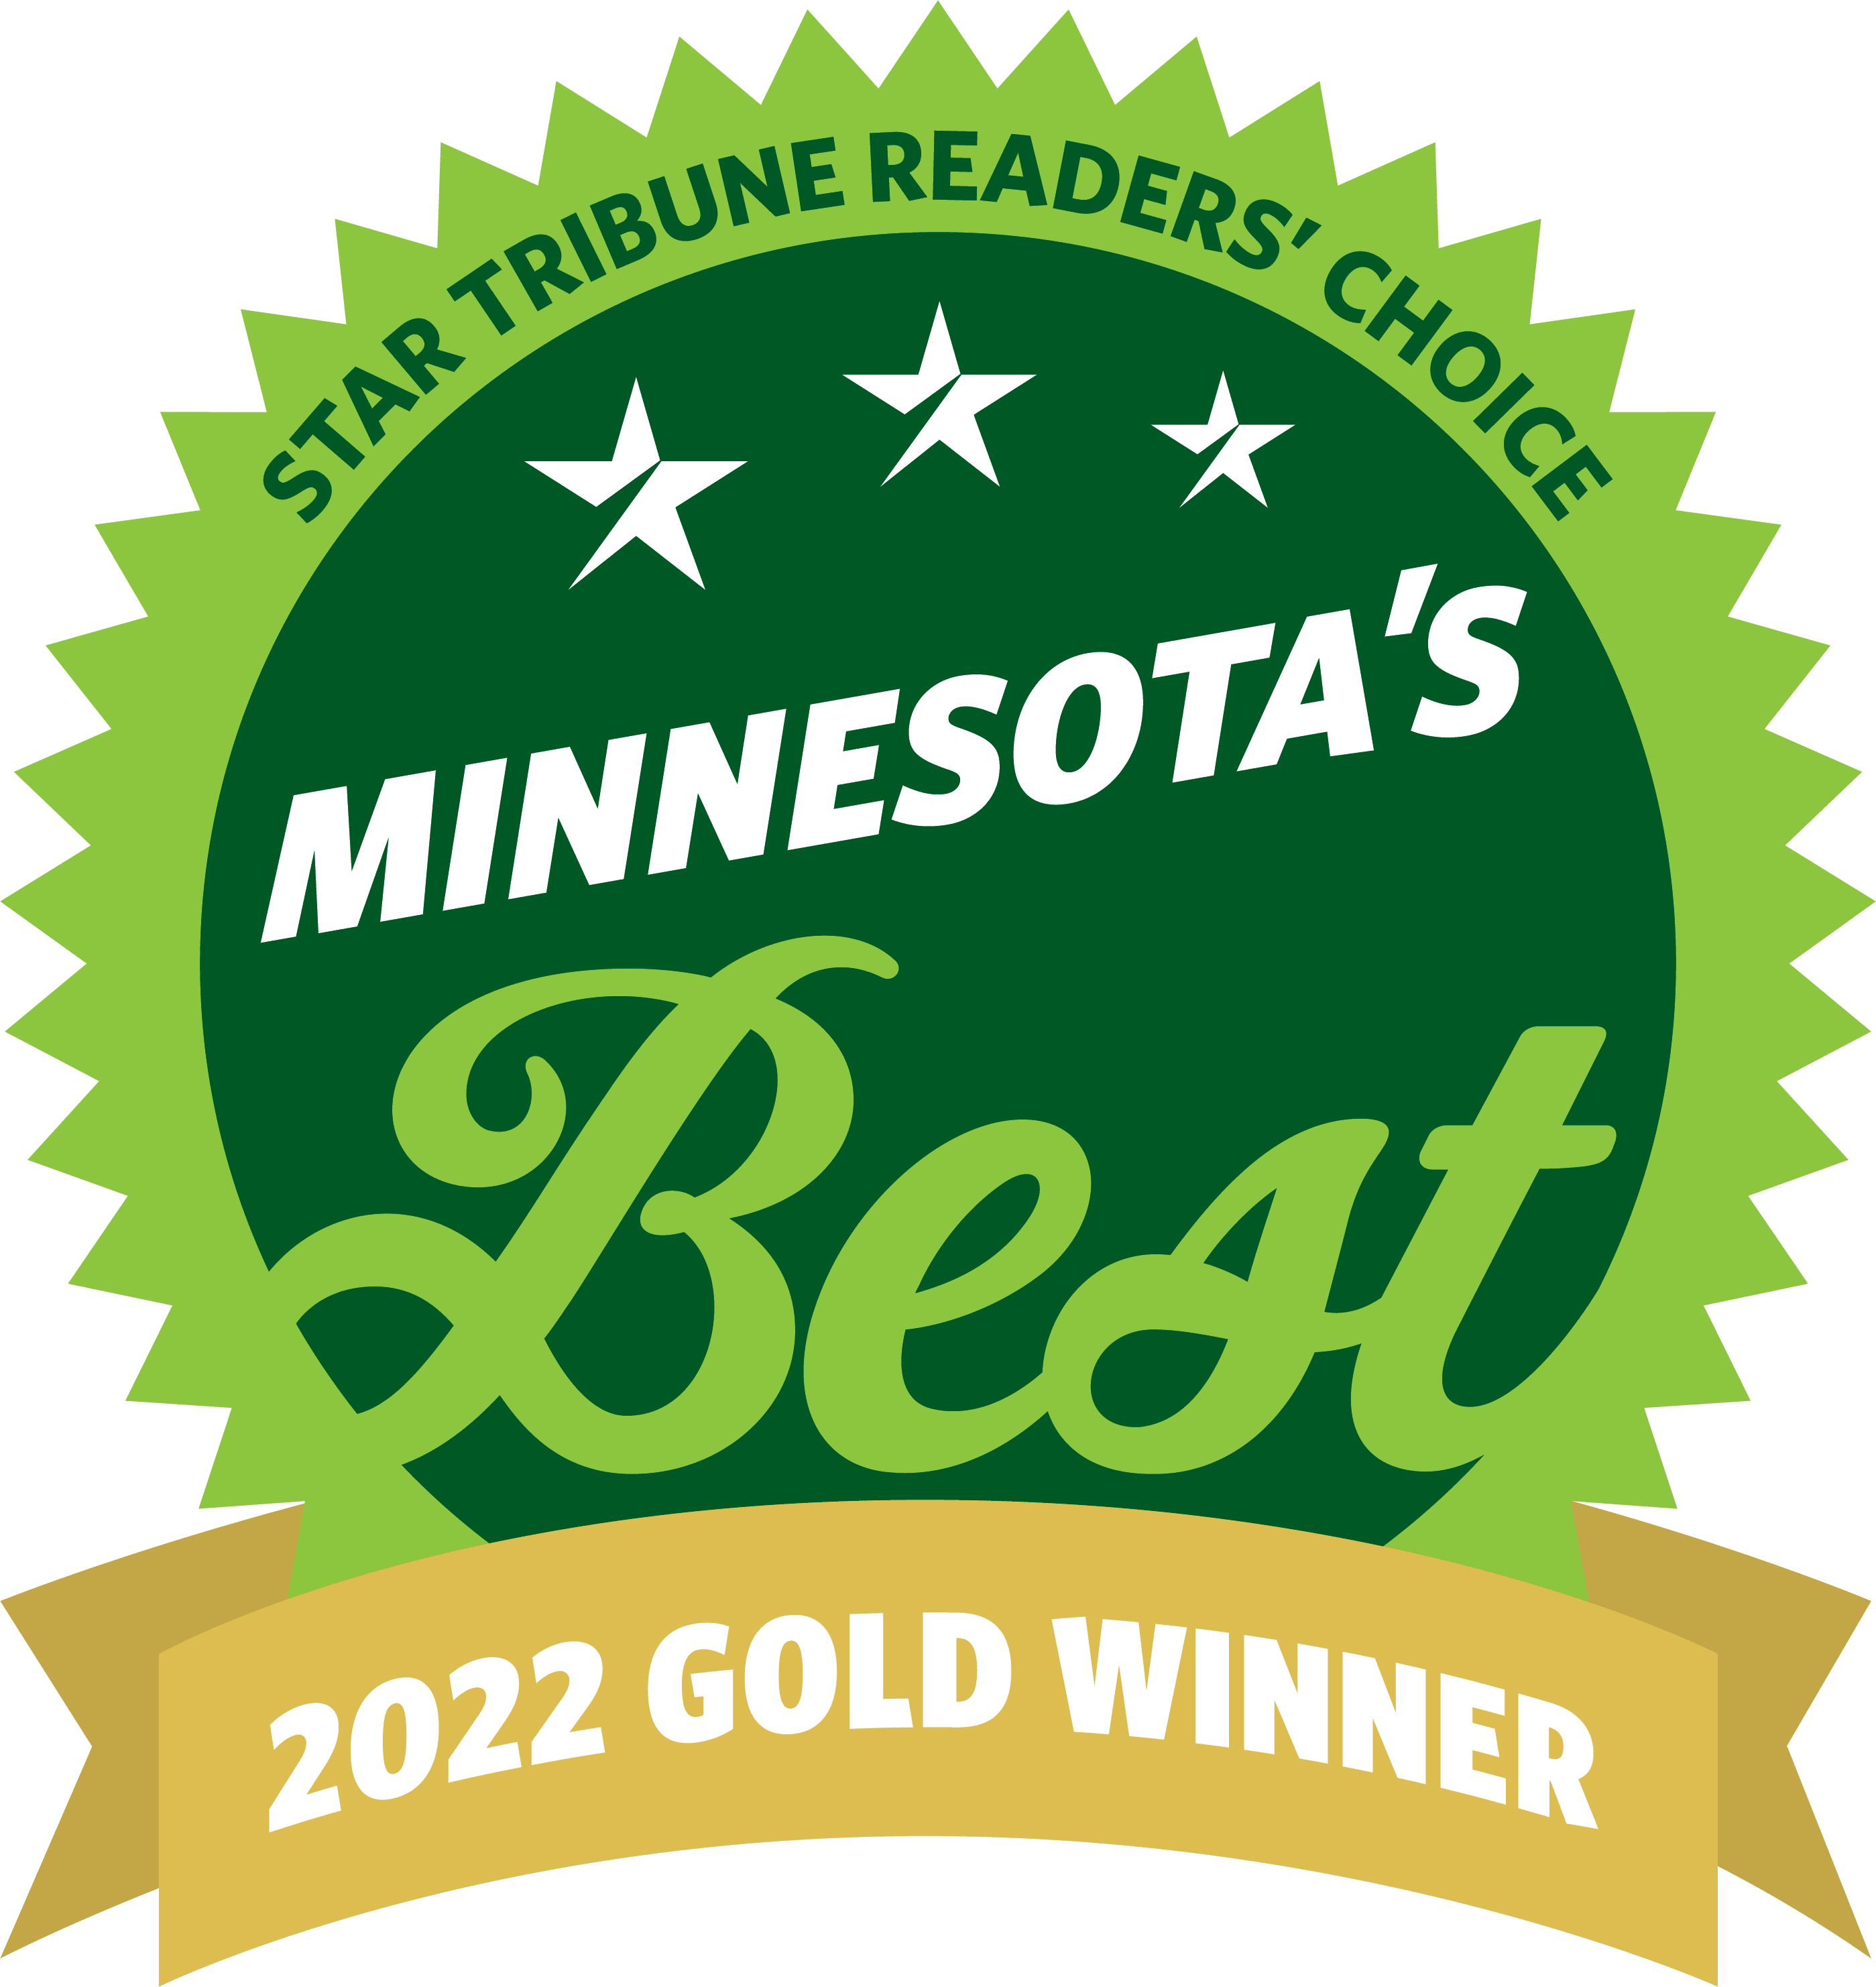 Minnesota Best Award for Applewood Pointe of Maple Grove at Arbor Lakes 